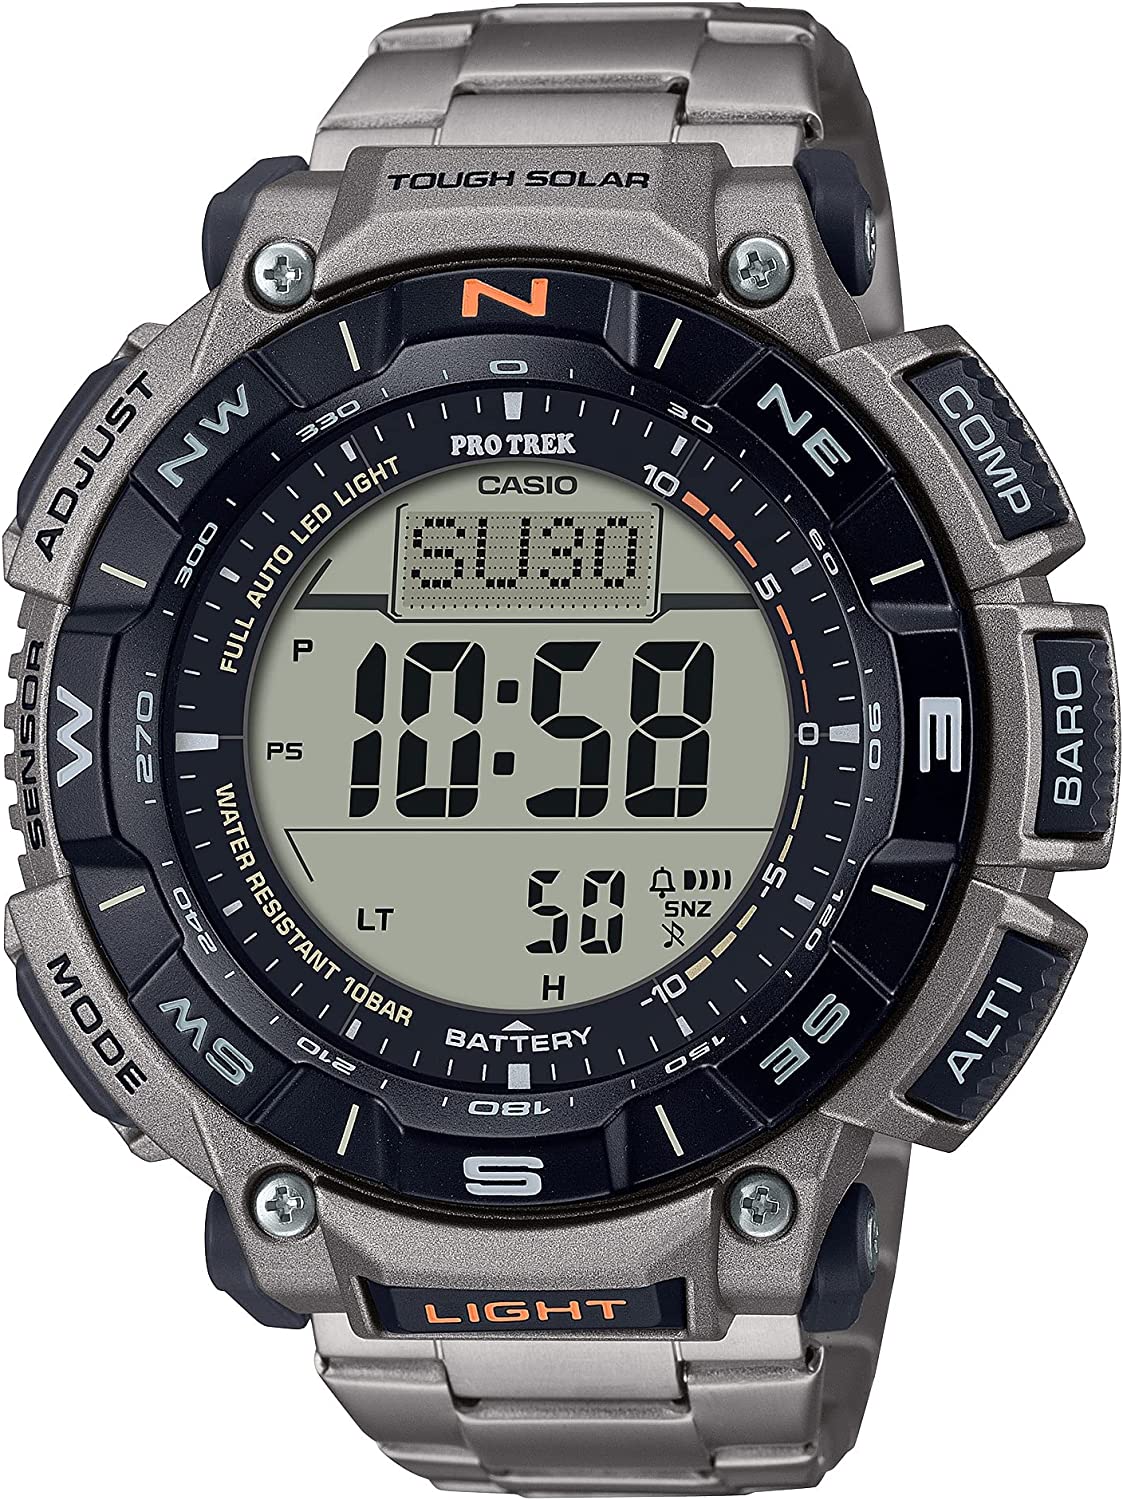 watch with altimeter and compass product comparison